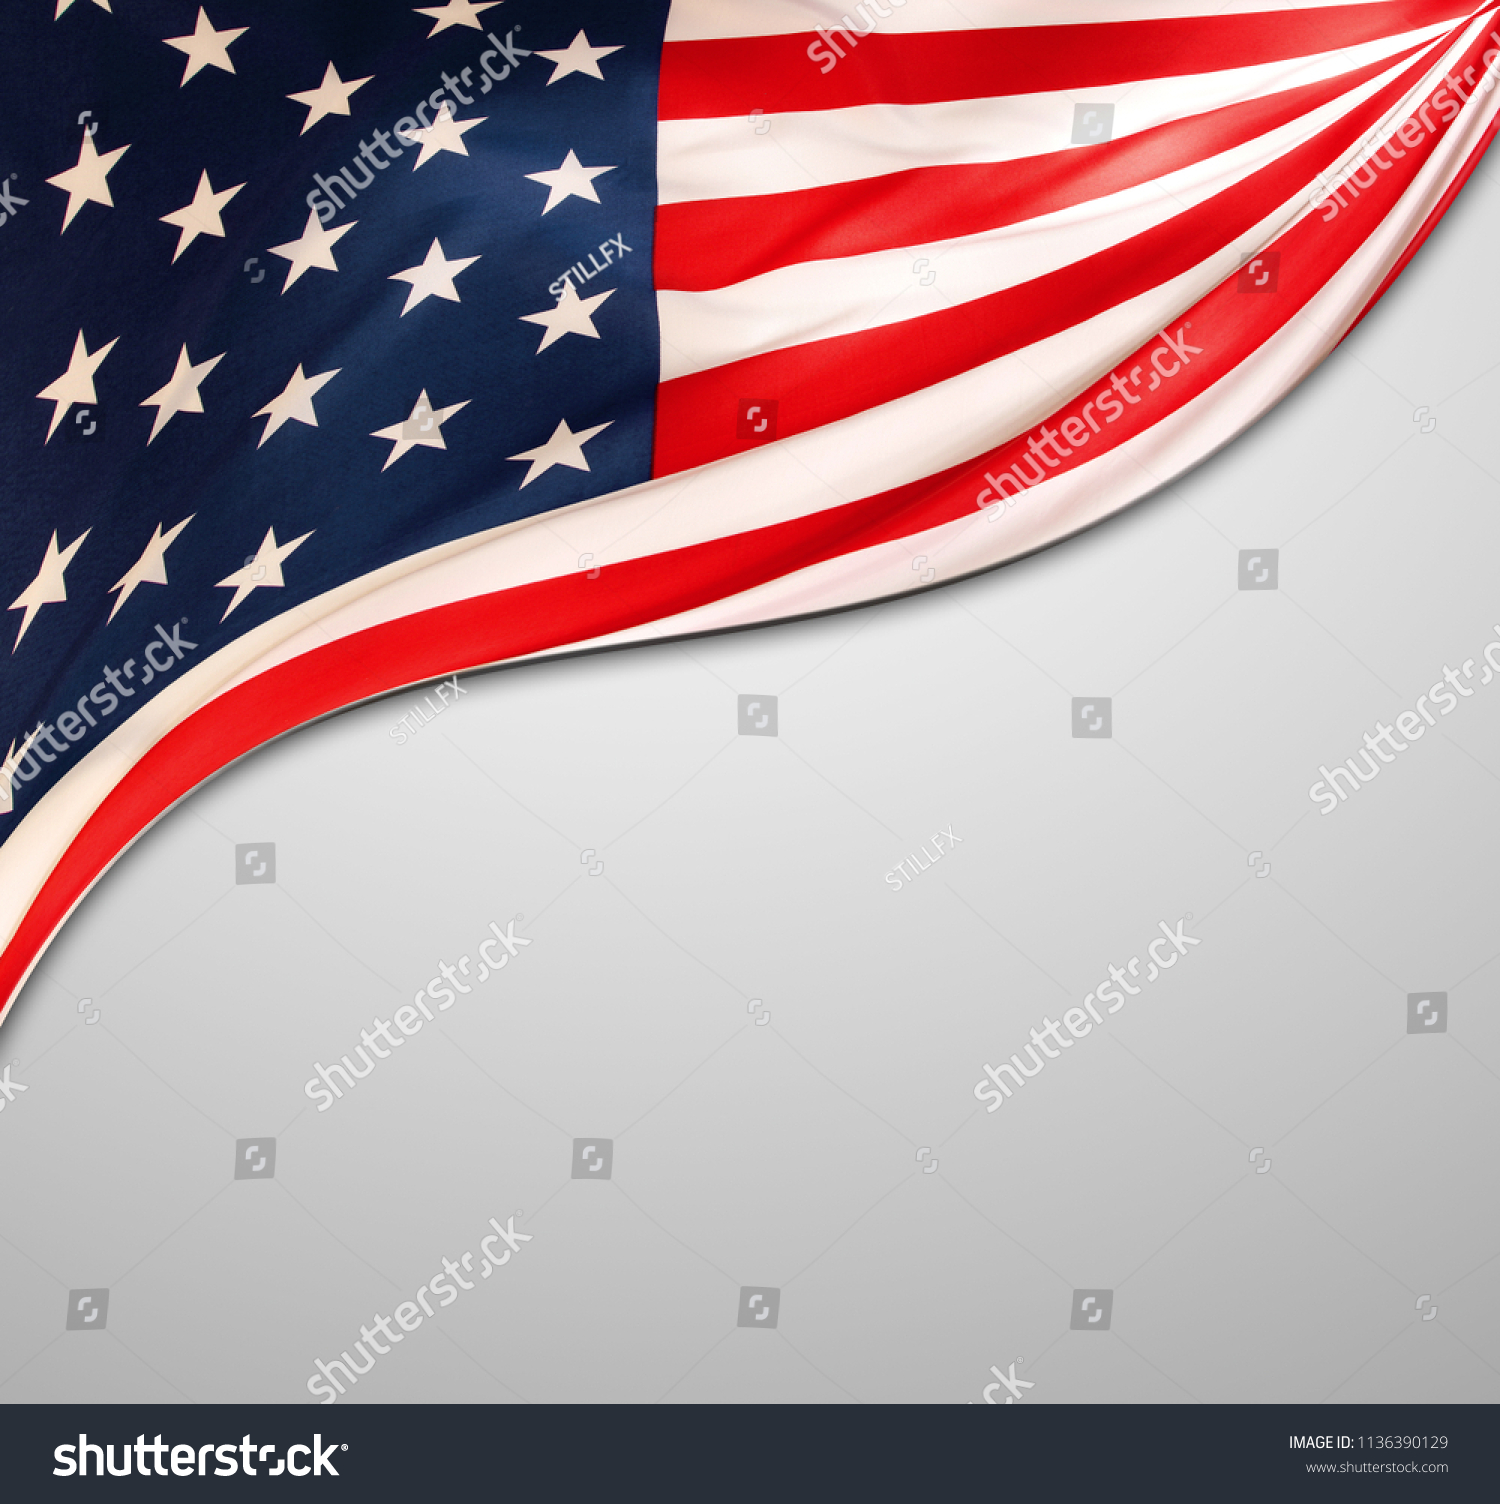 Closeup of American flag on grey background #1136390129